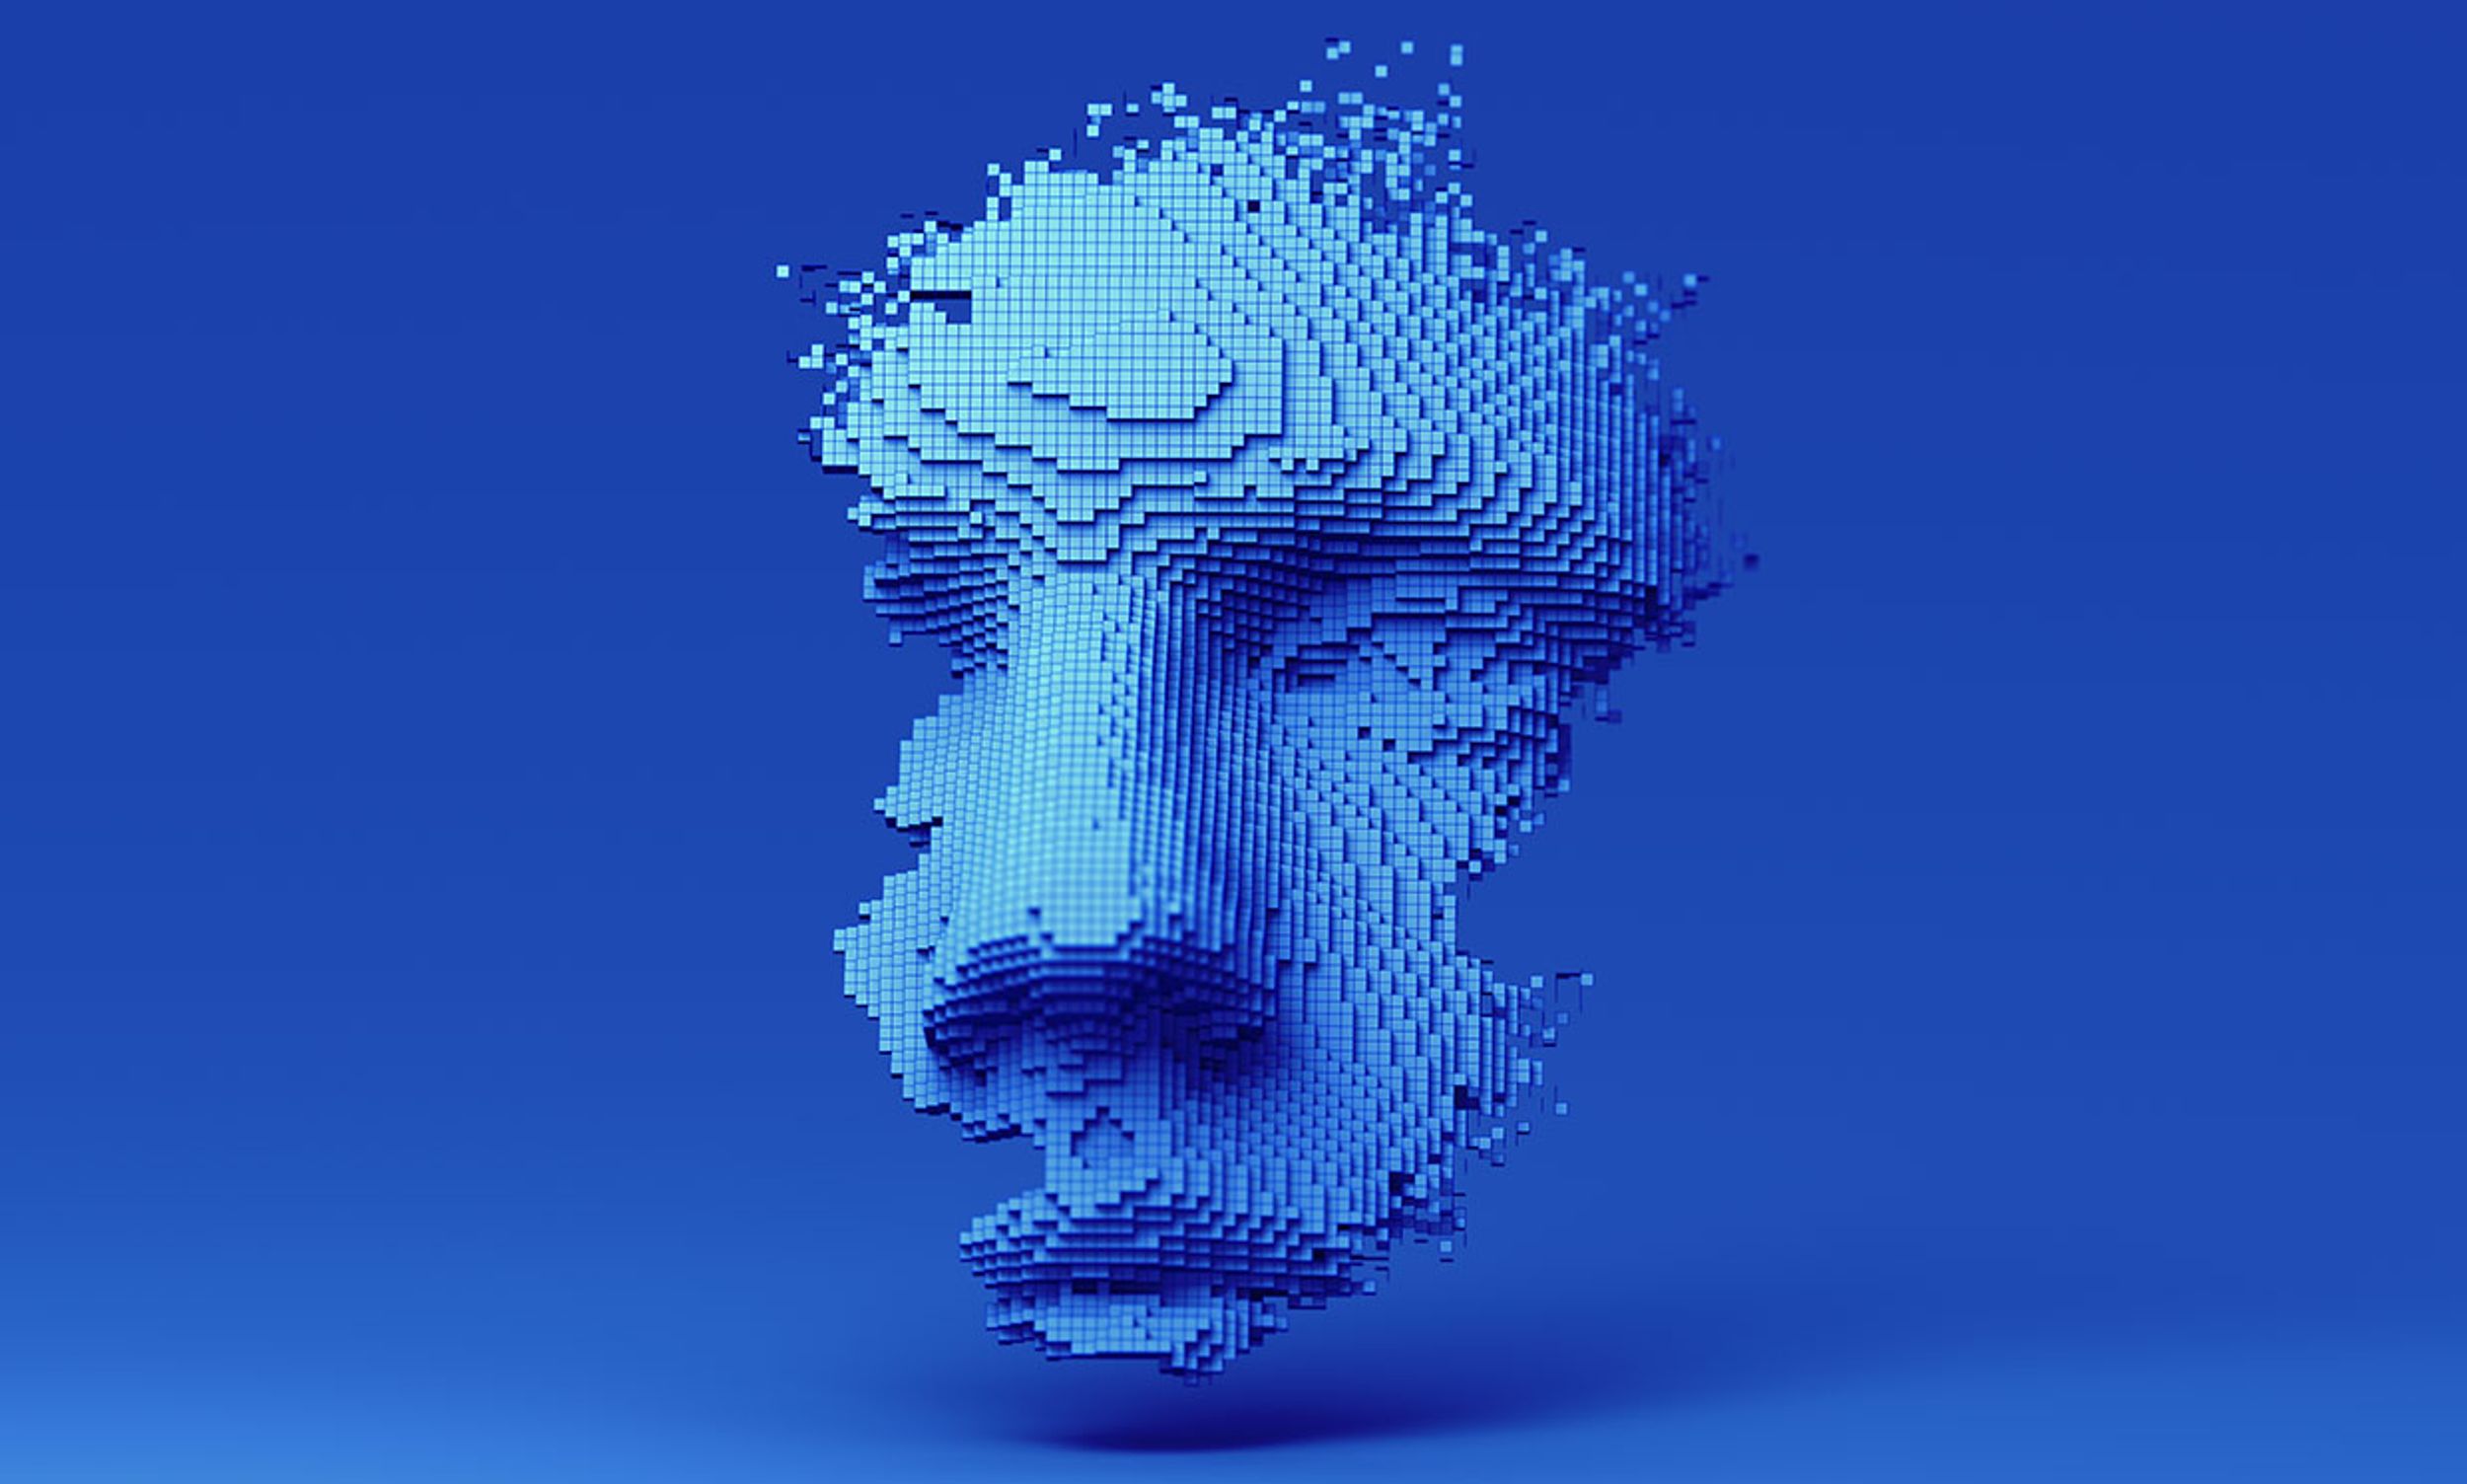 Abstract 3D Rendered Human Face Constructed of Cubes